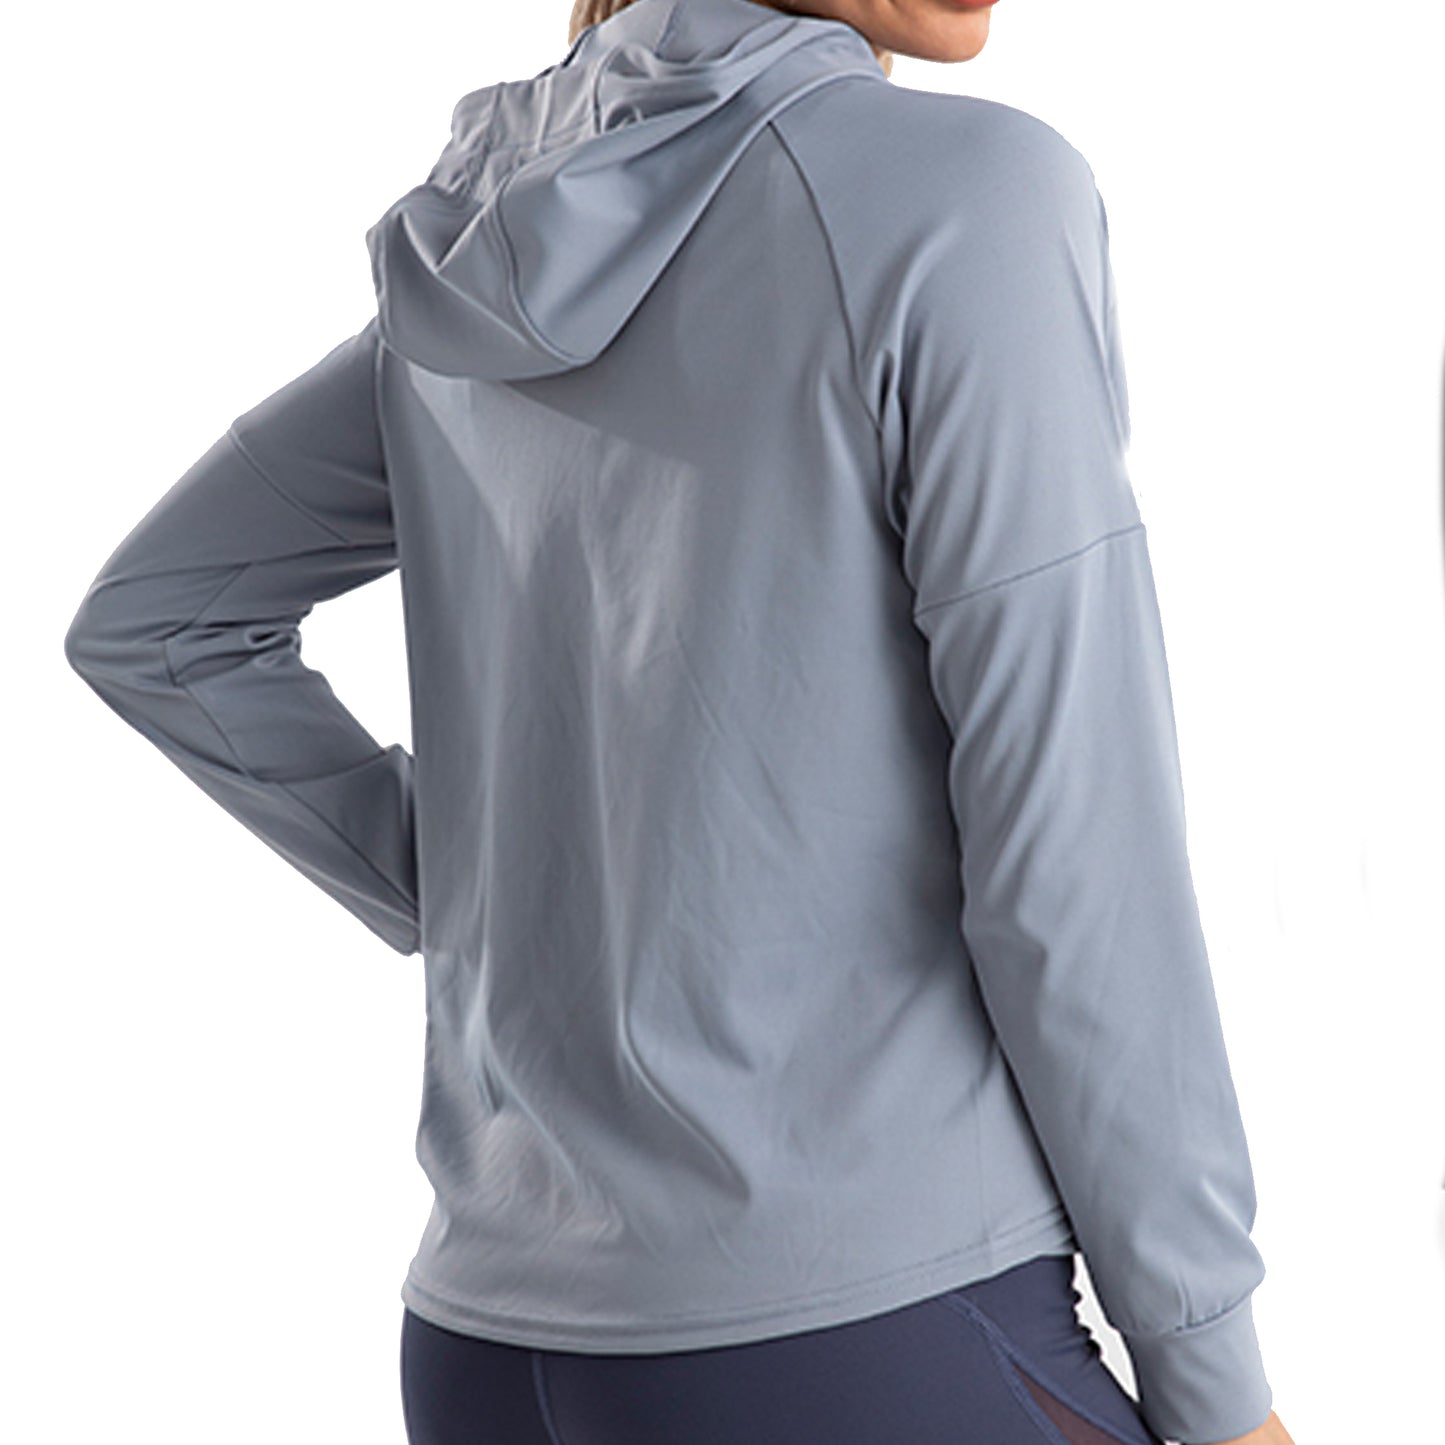 SOBEYO Full-Zip Jacket Lightweight Breathable Yoga Fitness Work-out sport Hoodies Gray